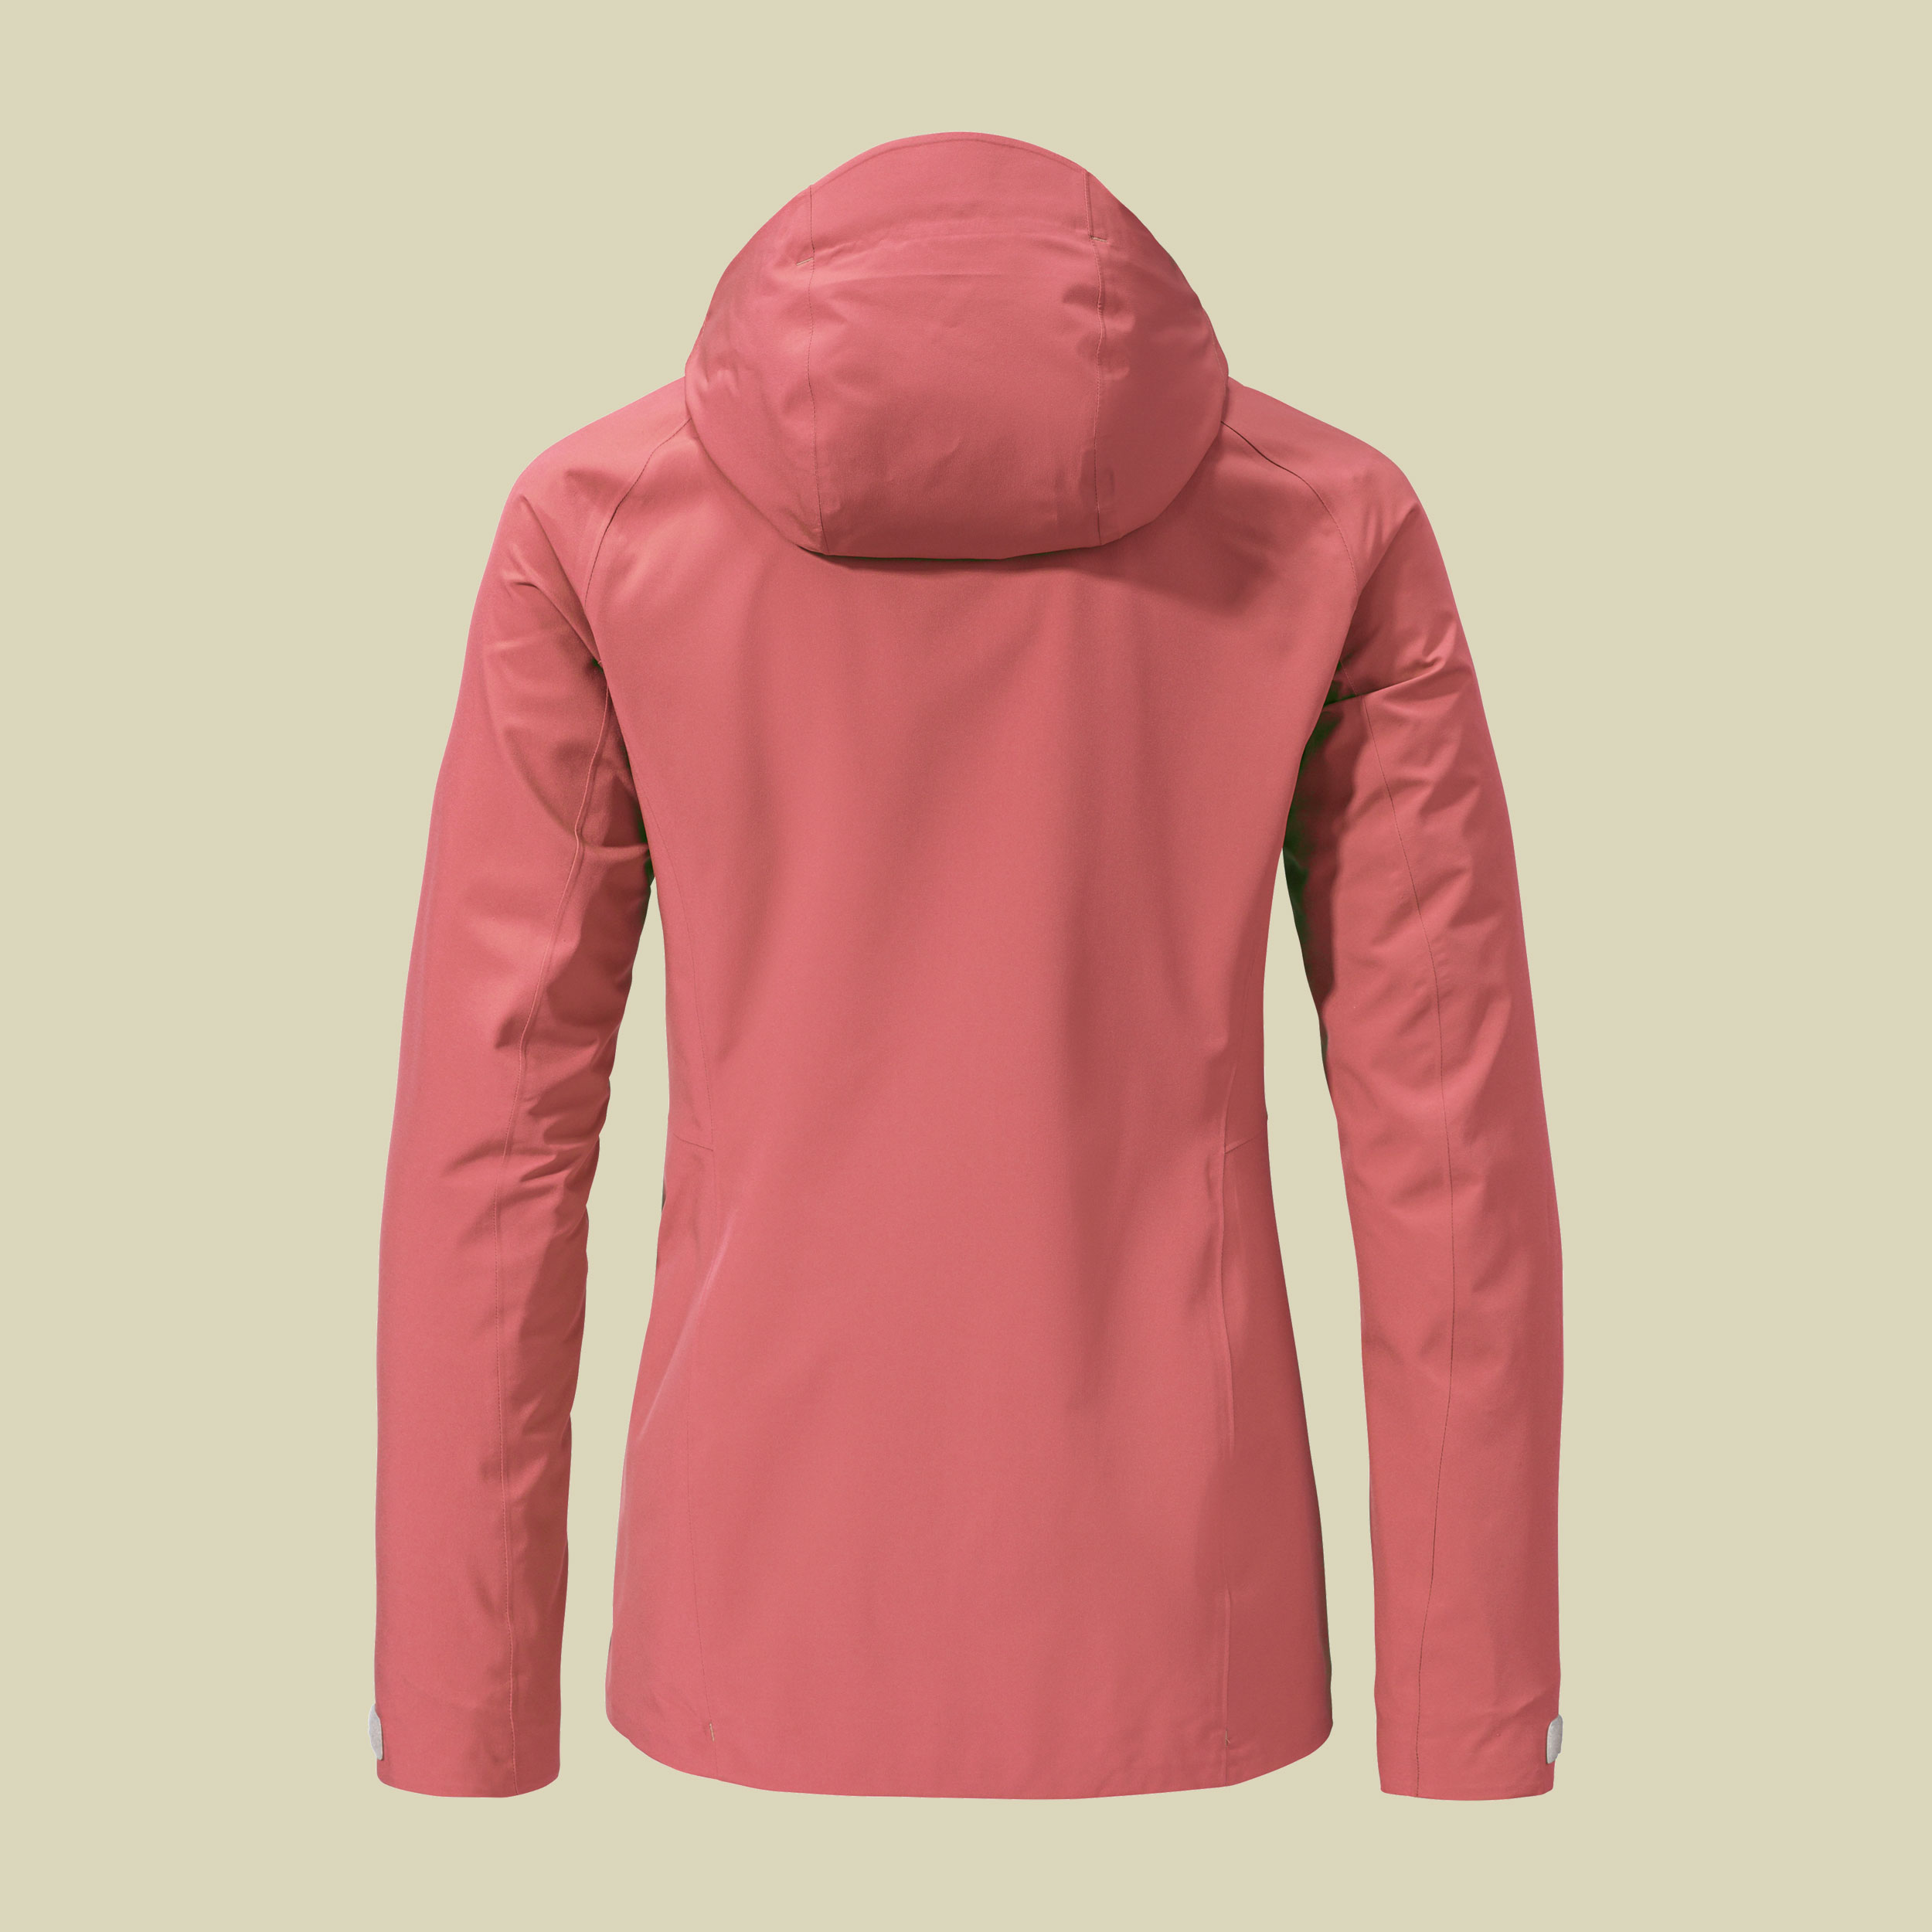 2L Jacket Ankelspitz L Women 44 pink - clasping rose